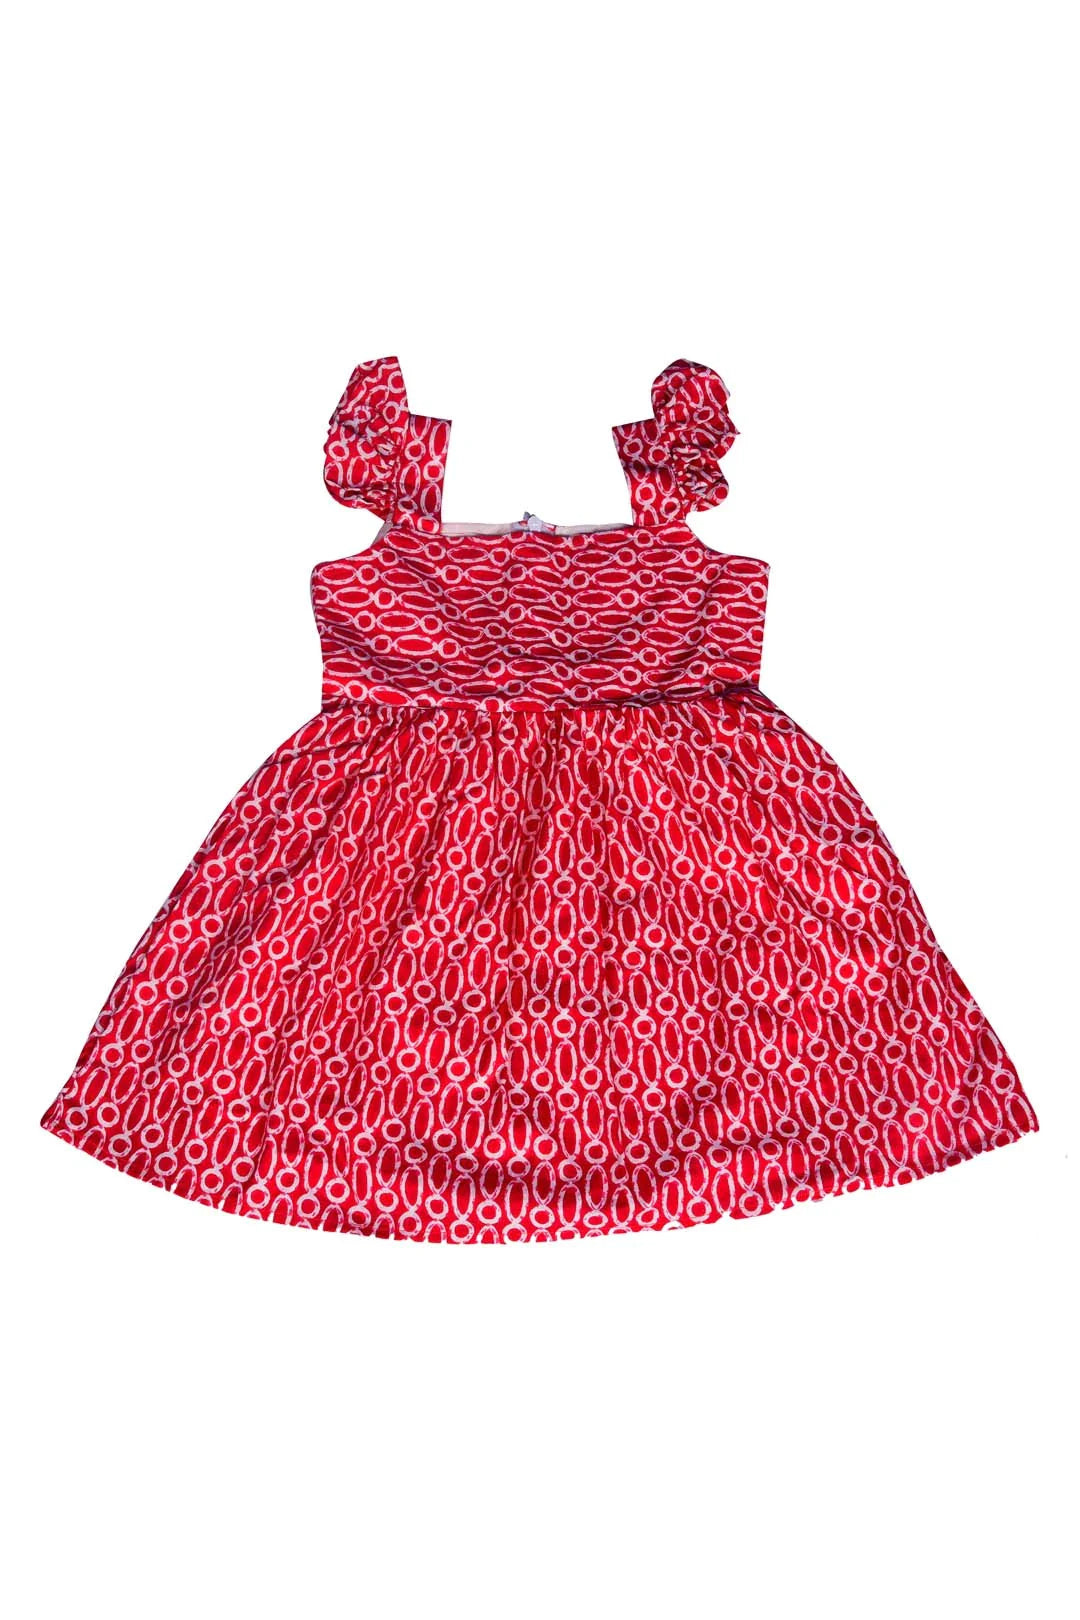 Pink Pretty Comfy Cotton Girls Frock